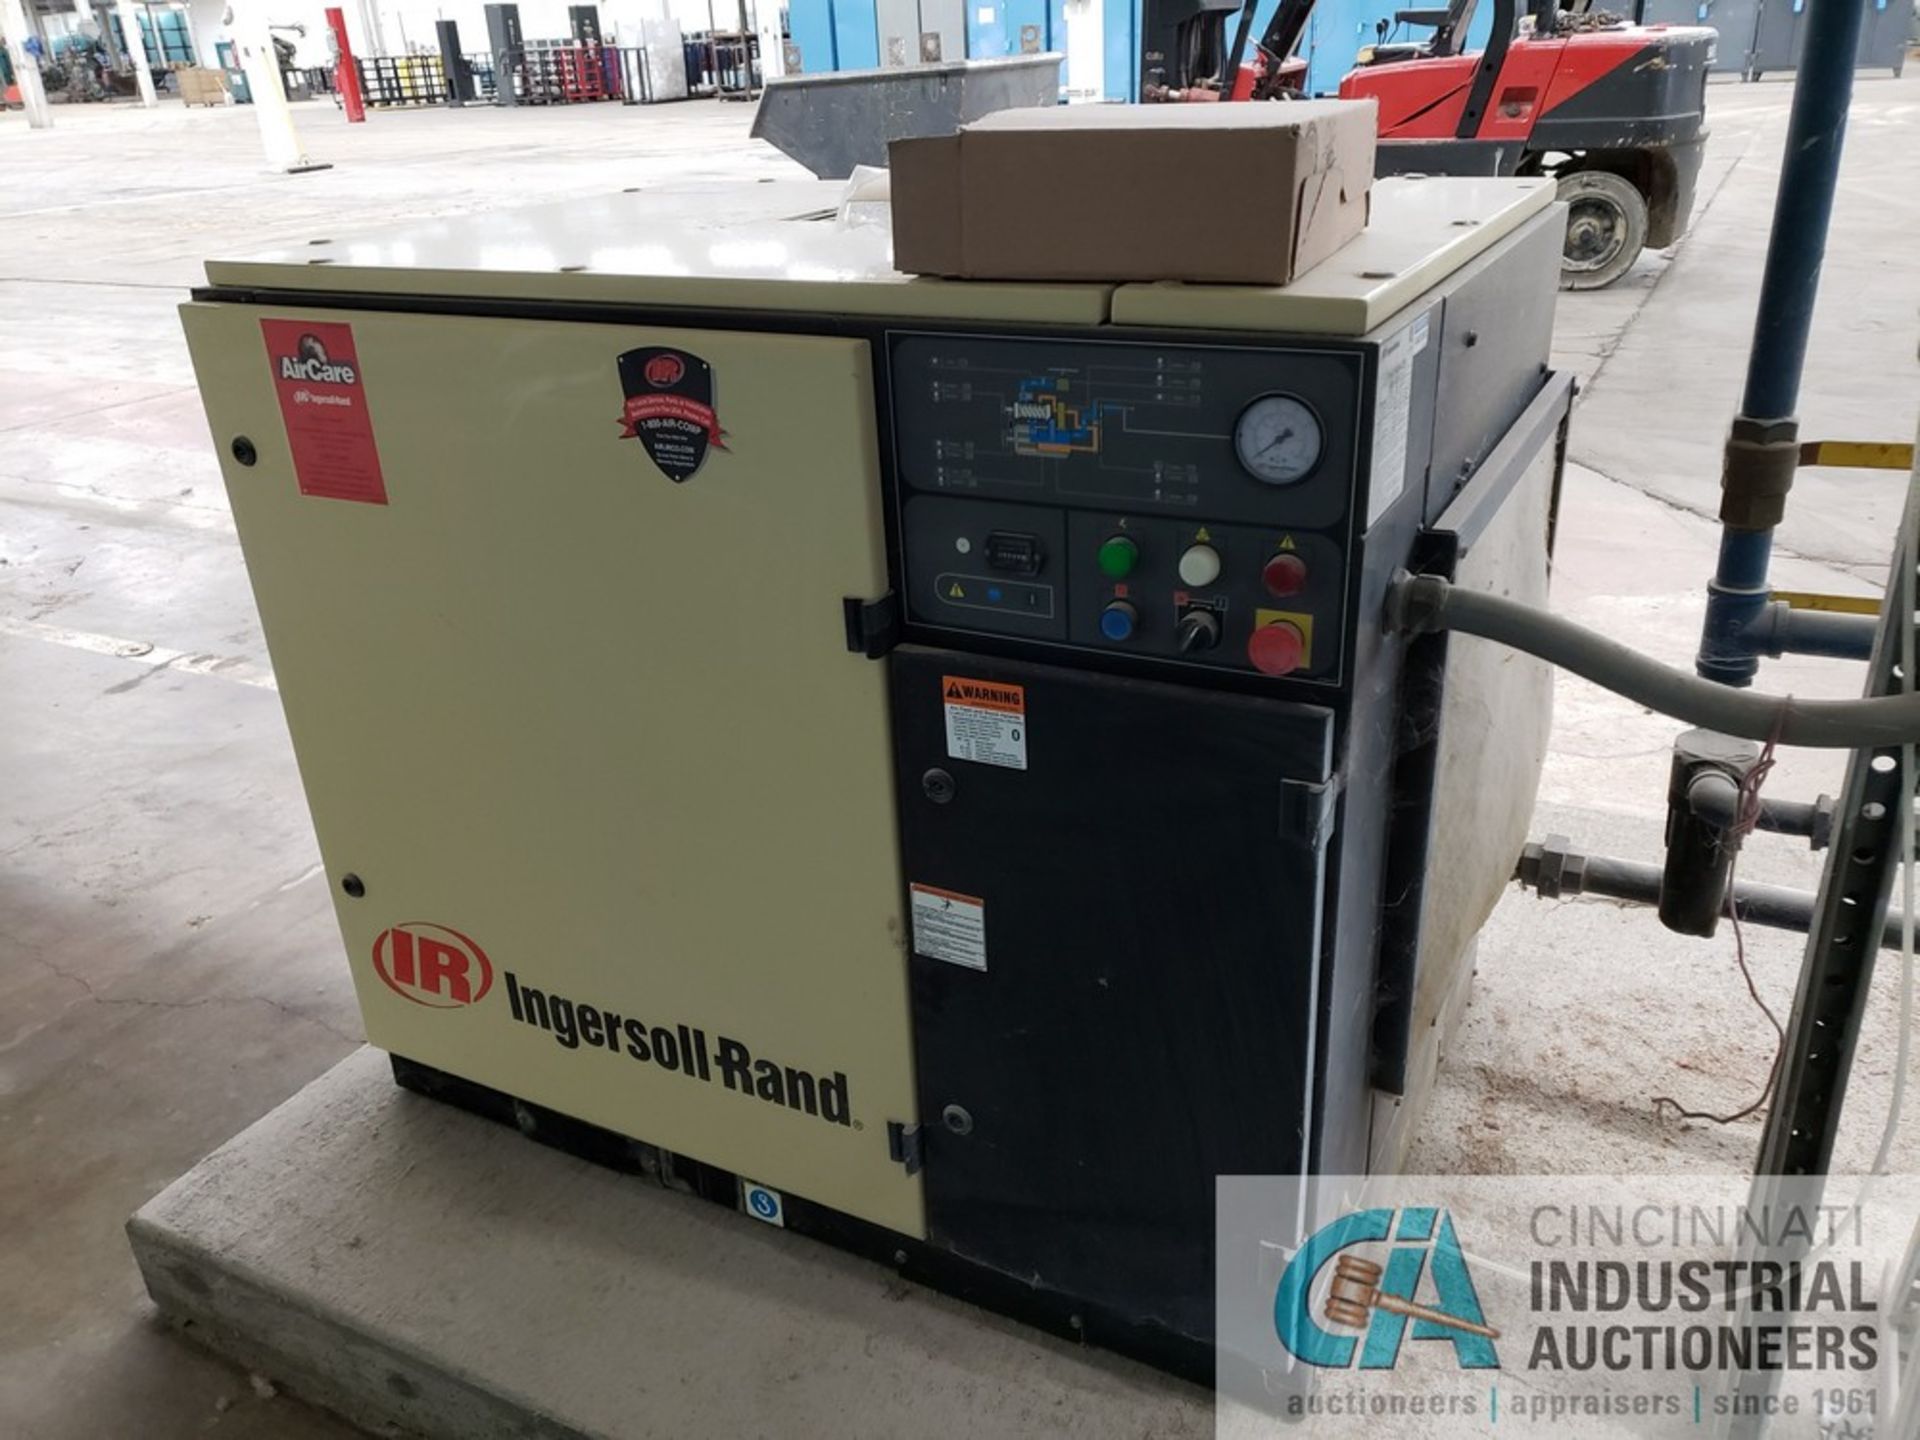 30-HP INGERSOLL RAND UP6-30-125 AIR COMPRESSOR; S/N PA42300432D, 265 HOURS SHOWING ON ANALOG METER